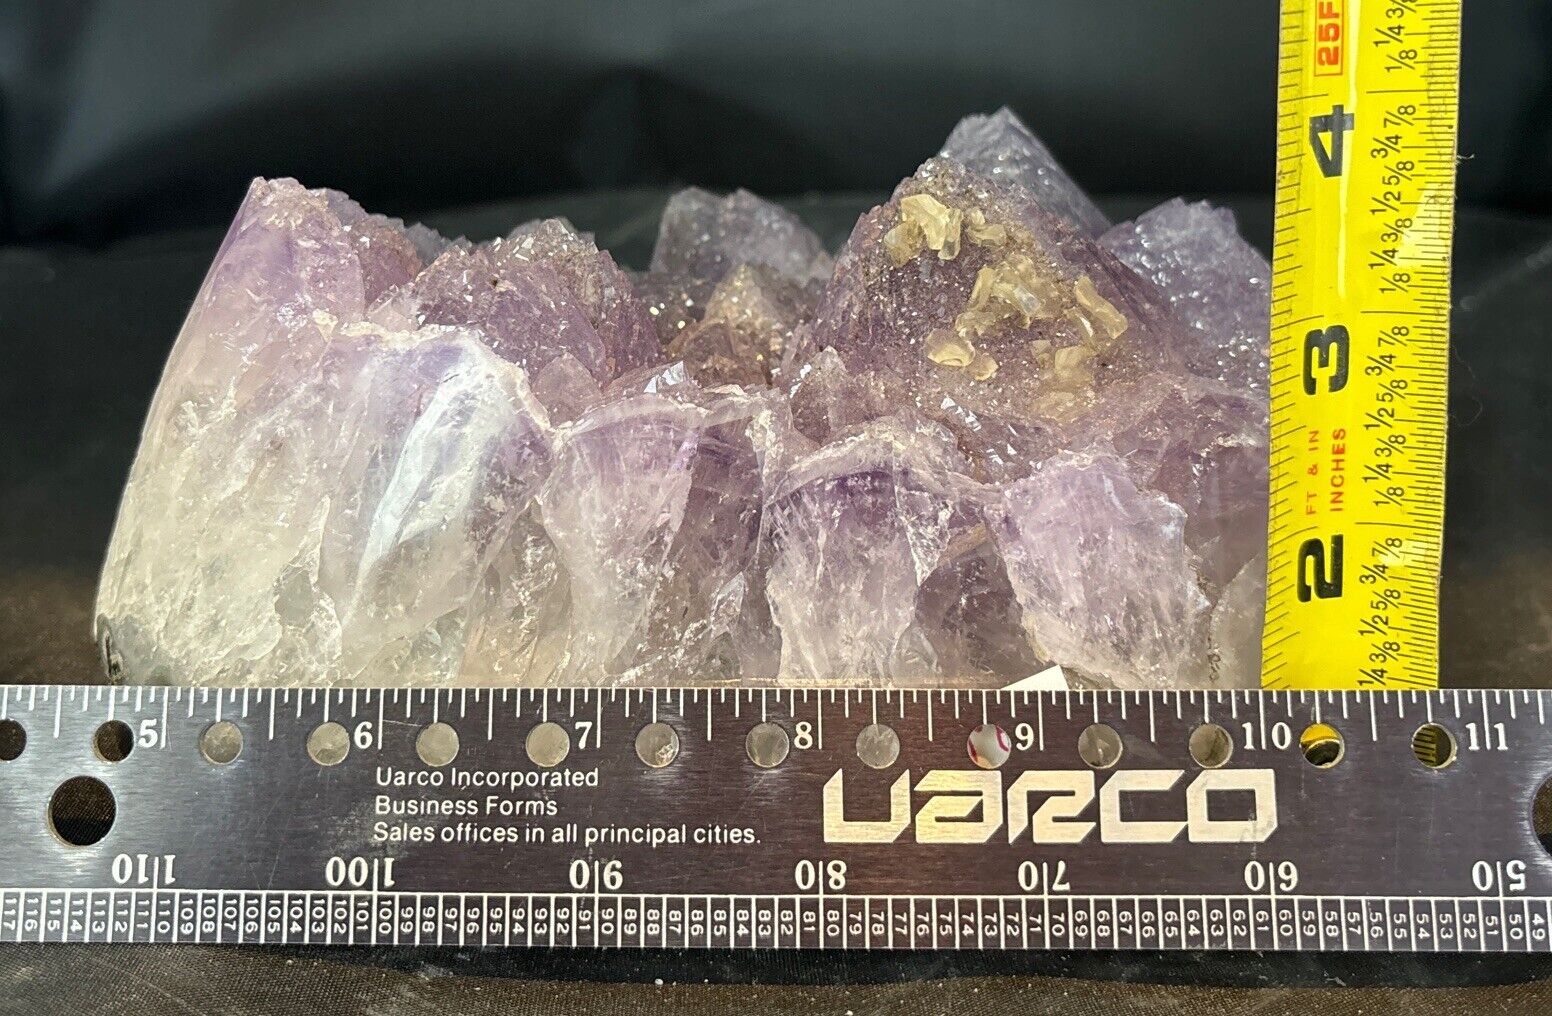 Full polished amethyst lustrous large cluster crystals